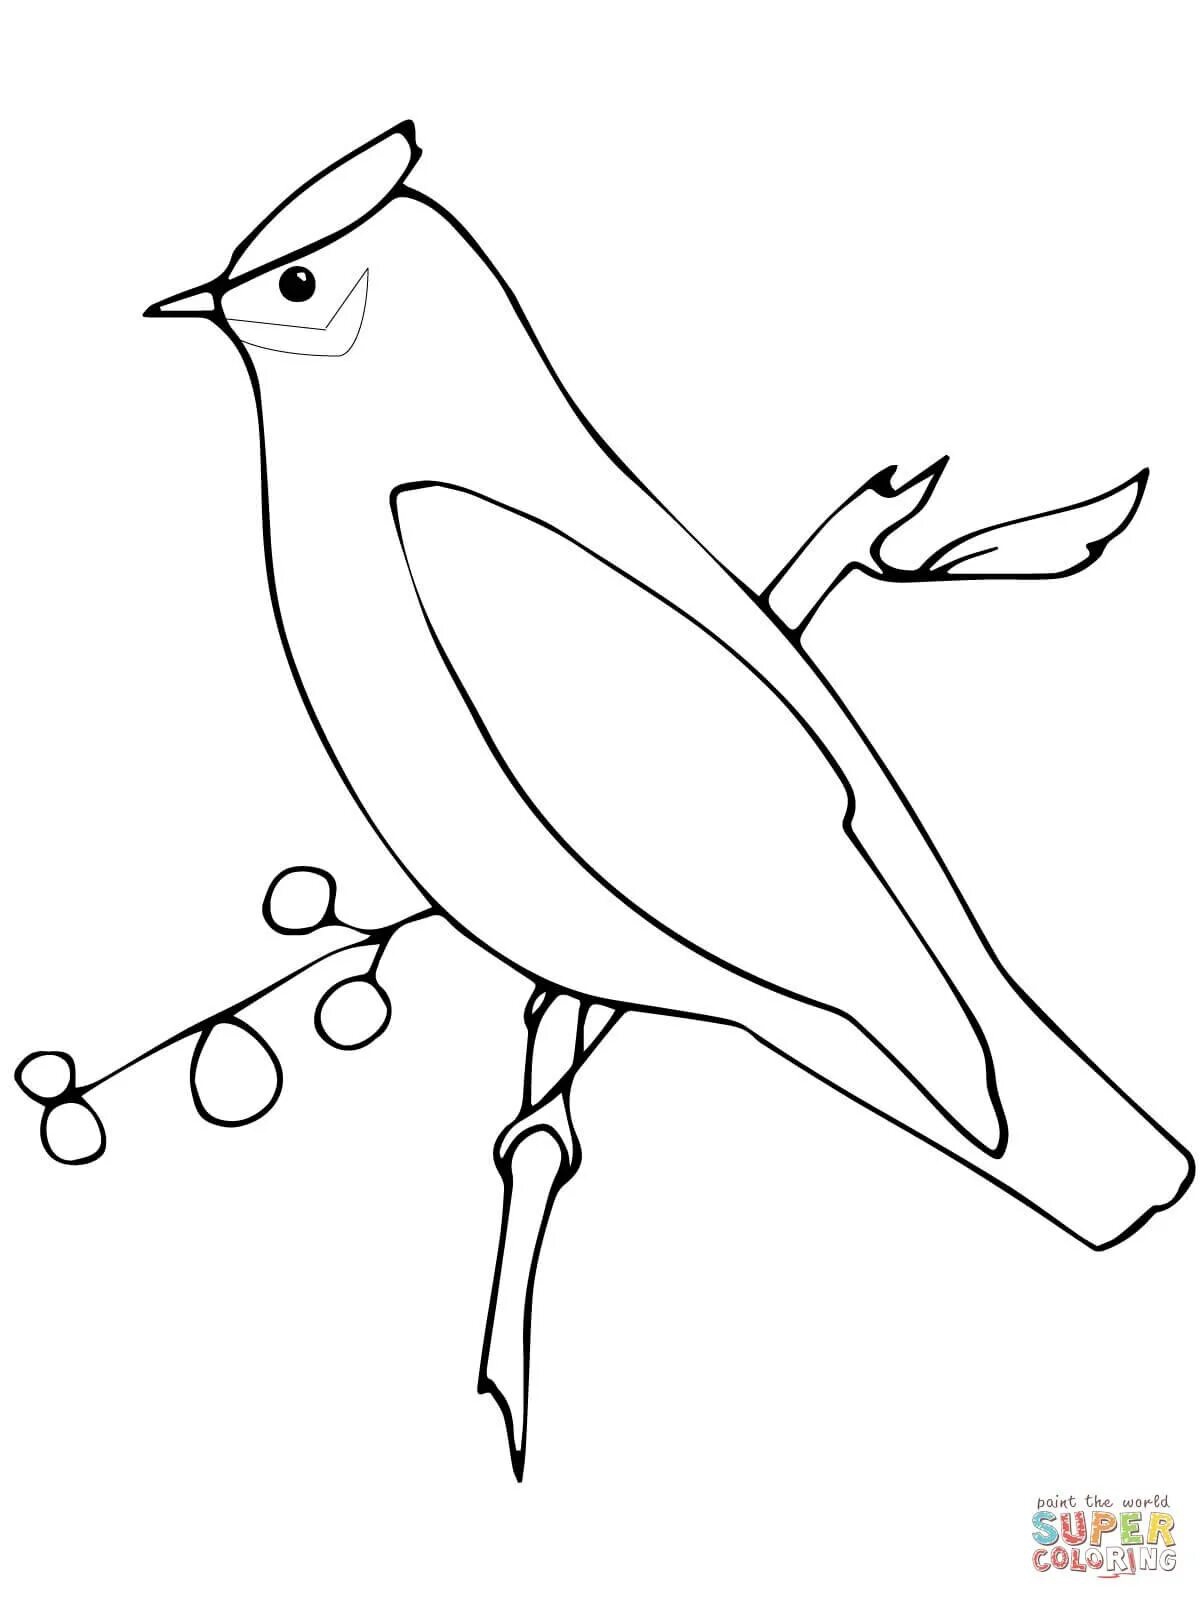 Coloring page wild bird waxwing